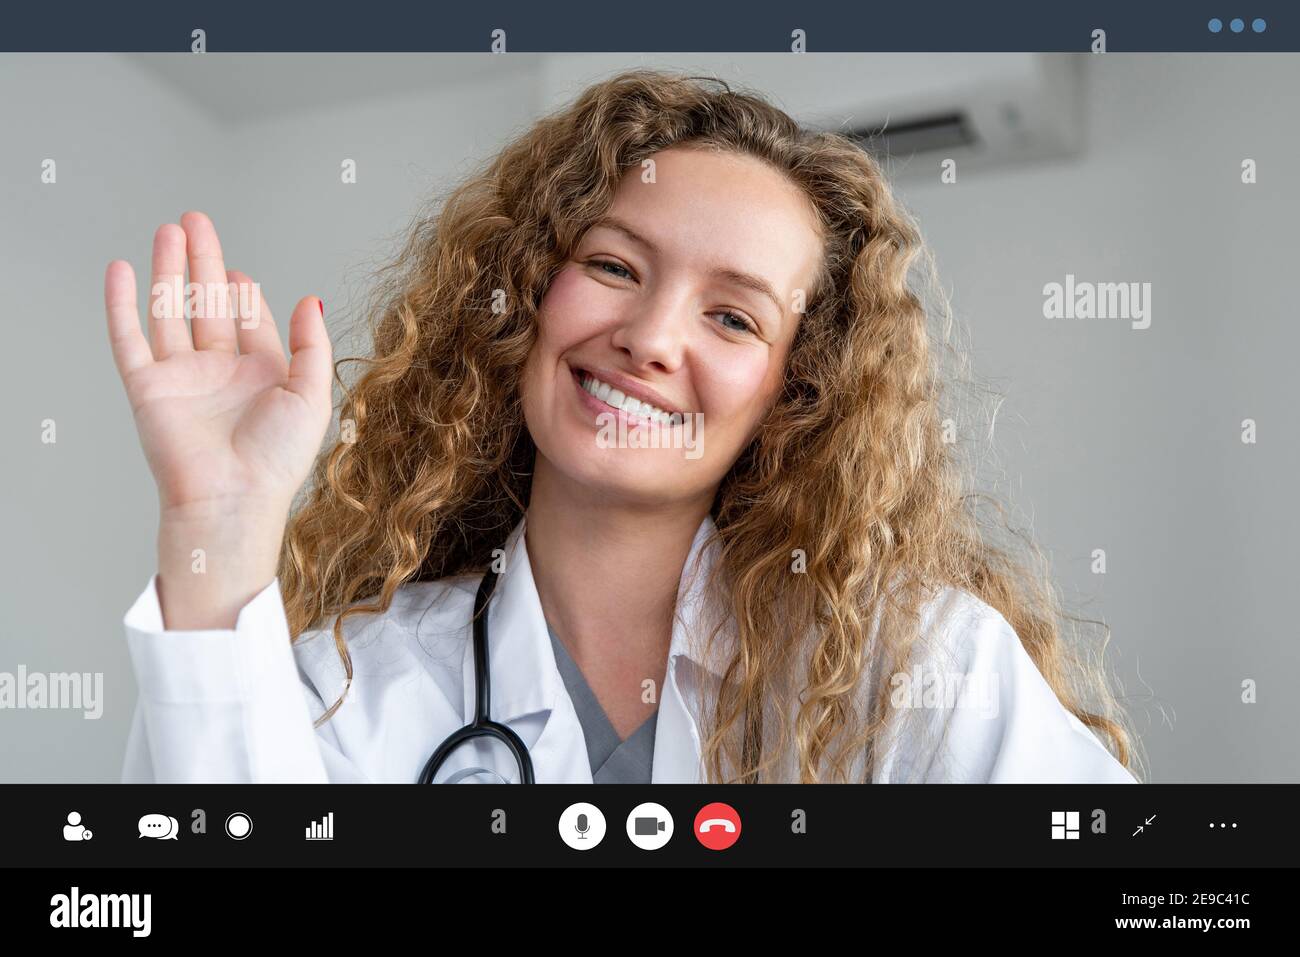 Young female doctor waving hand greeting patient online via video call, home medical consulation service concepts Stock Photo